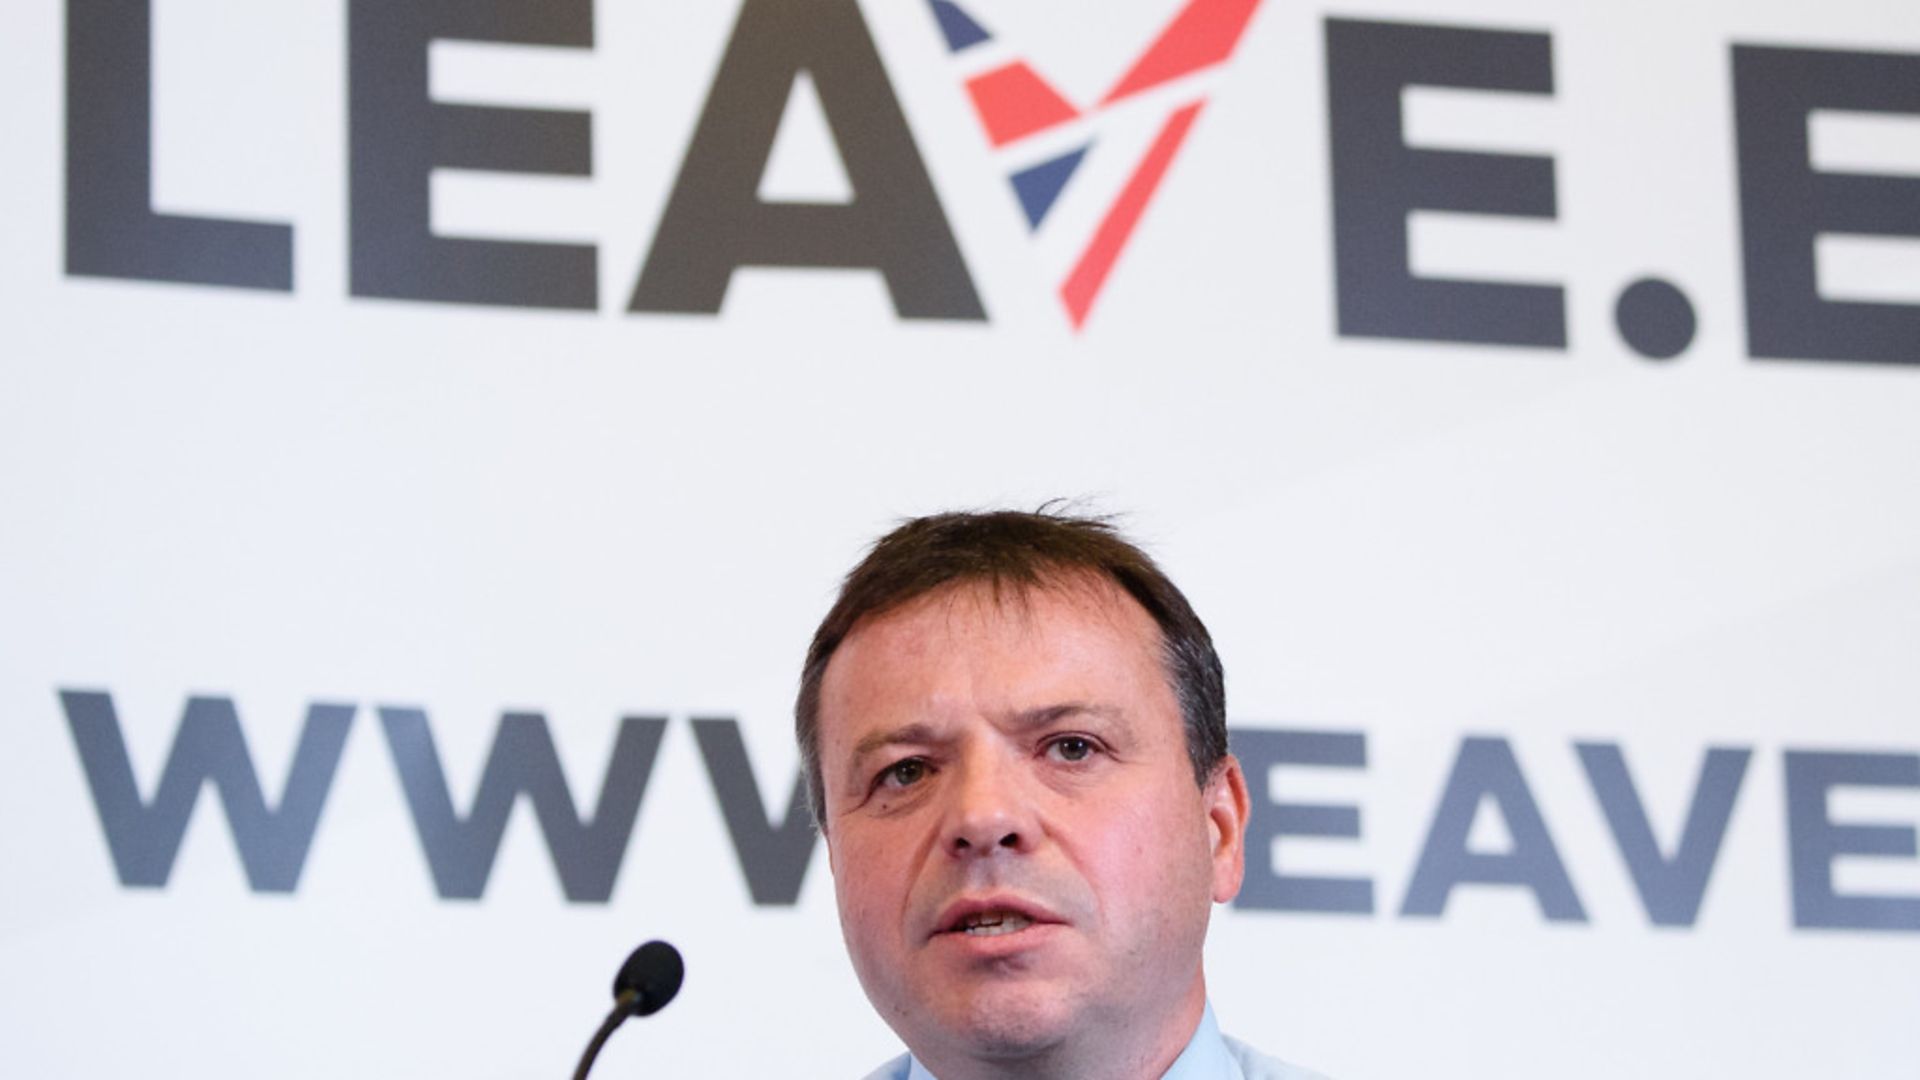 British businessman Arron Banks takes part in a press briefing by the "Leave.EU" campaign group - Credit: LEON NEAL/AFP/Getty Images